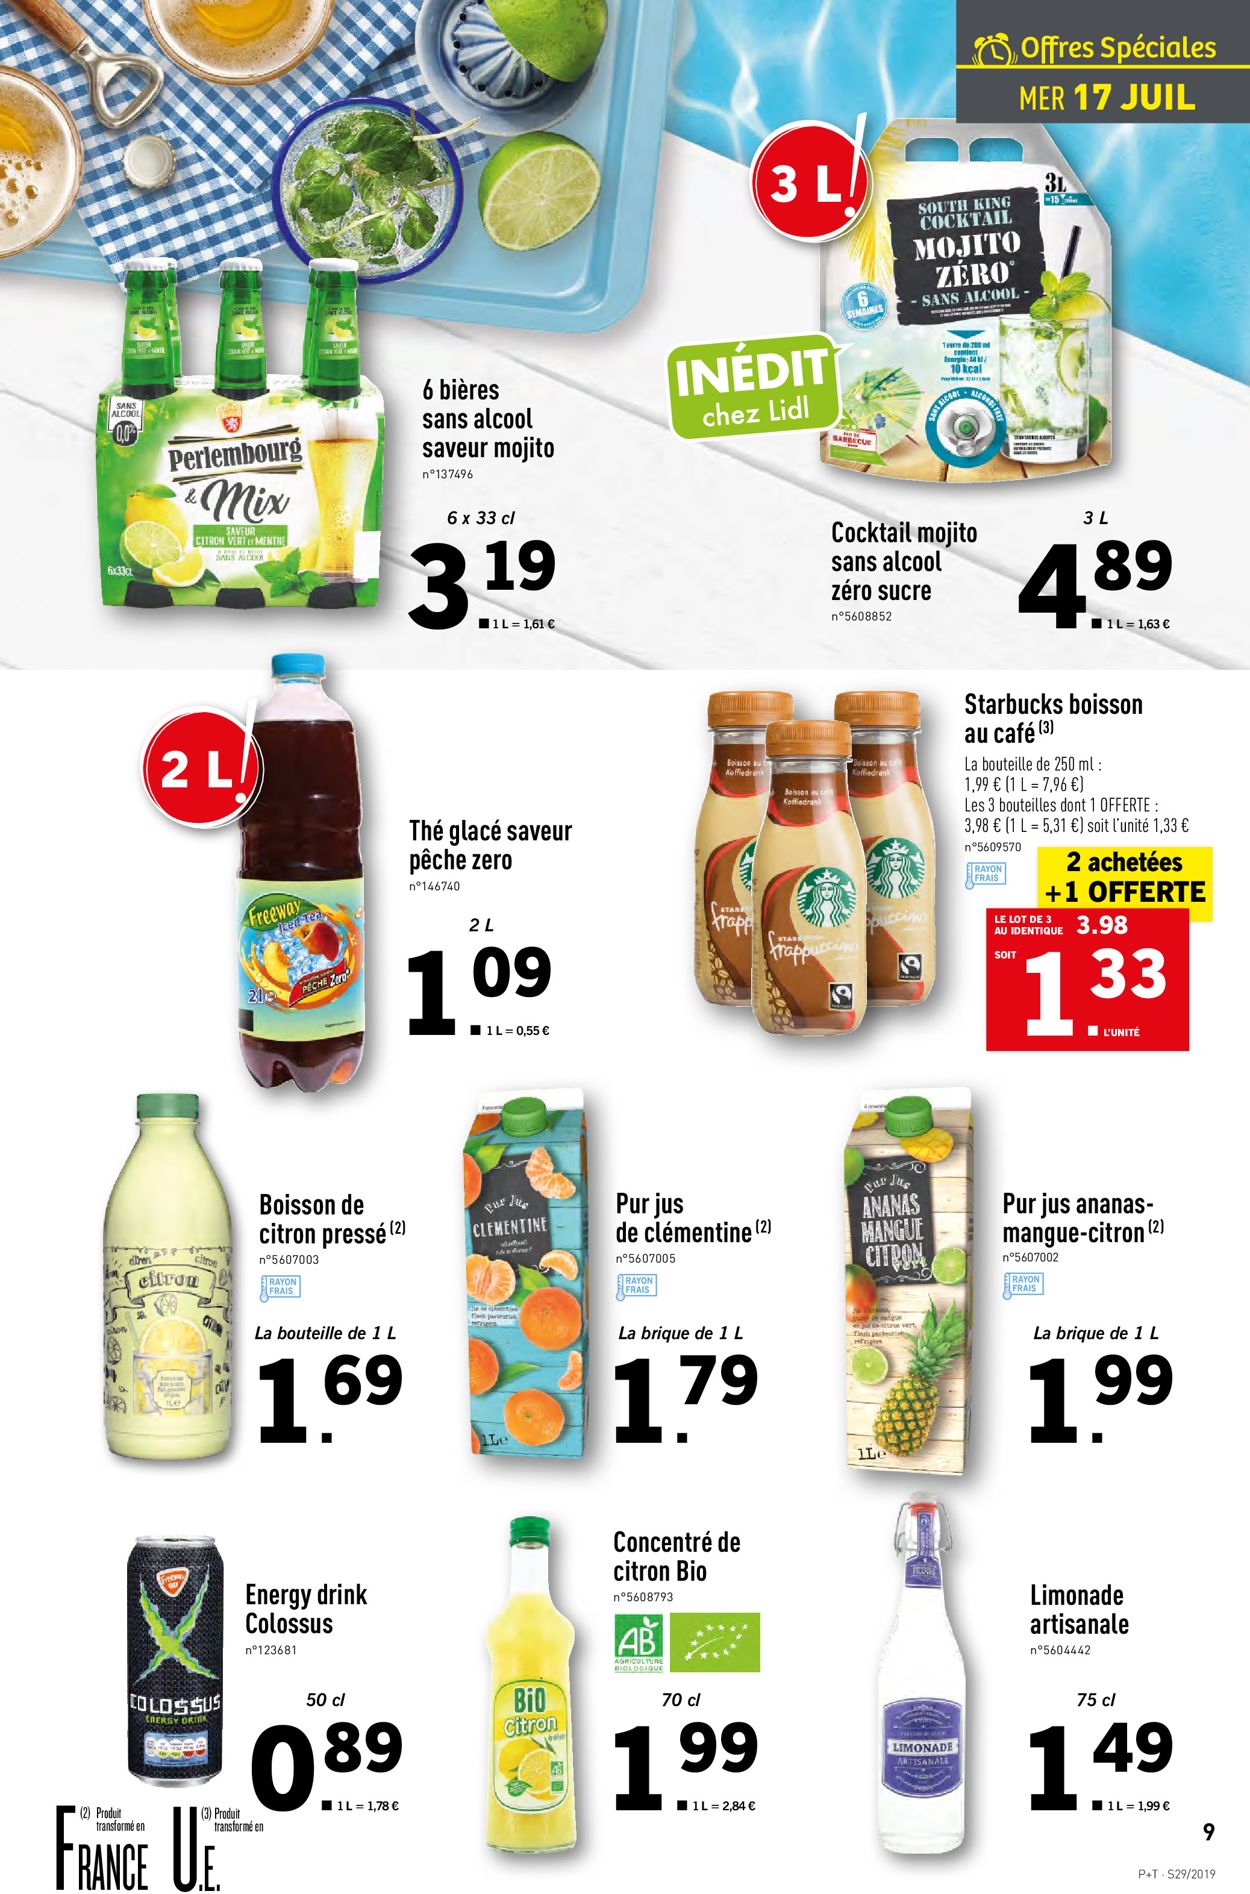 Lidl Catalogue - 17.07-23.07.2019 (Page 9)